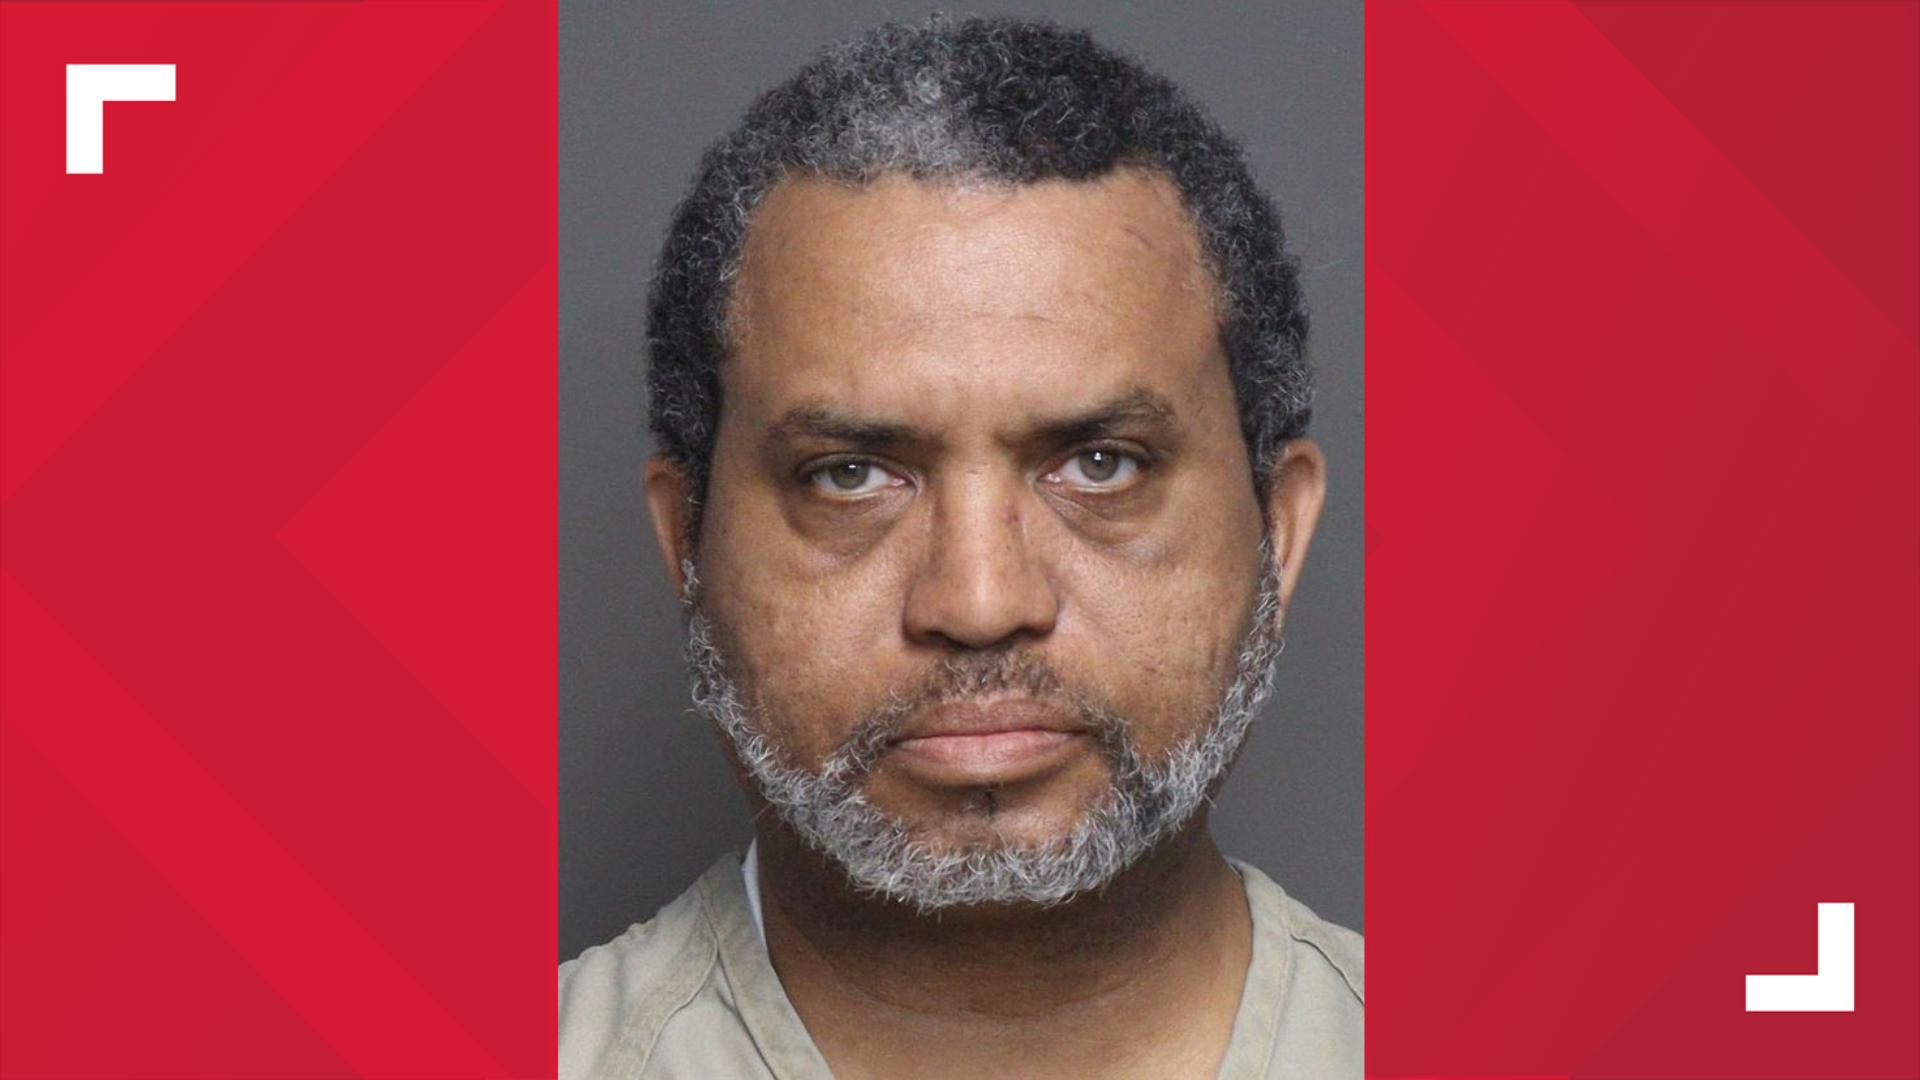 Andrew Brown, 49, was accused in the case after investigators found 392 gigabytes of material involving child sexual abuse on the BitTorrent network.